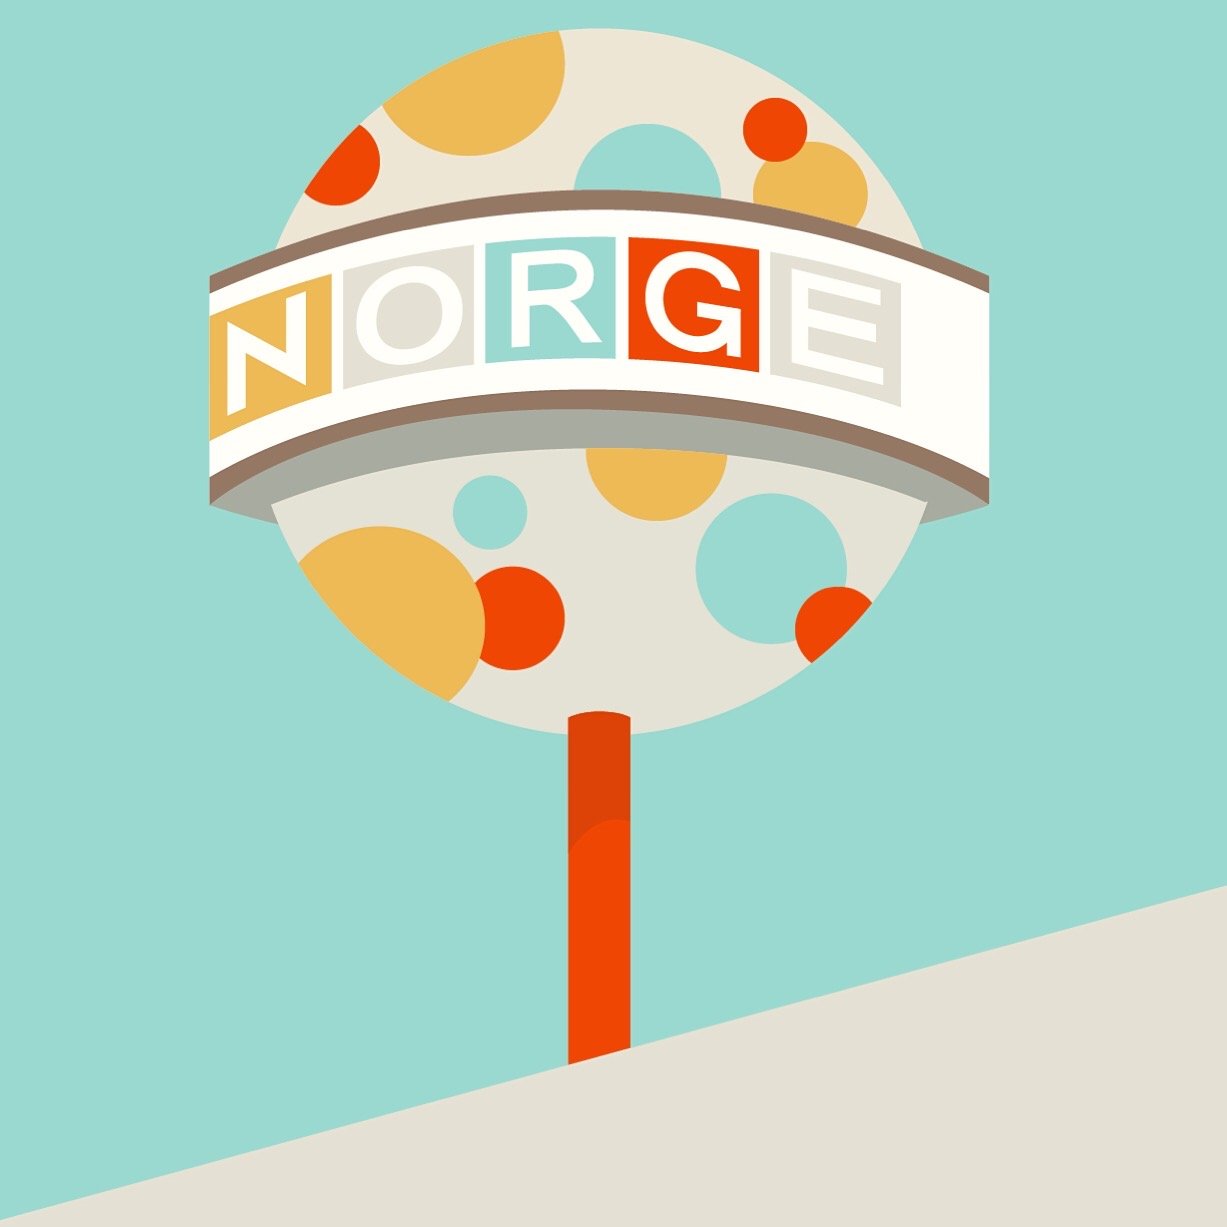  NORGE balls are precious dinosaurs  If you see one in the wild, stop and admire it 